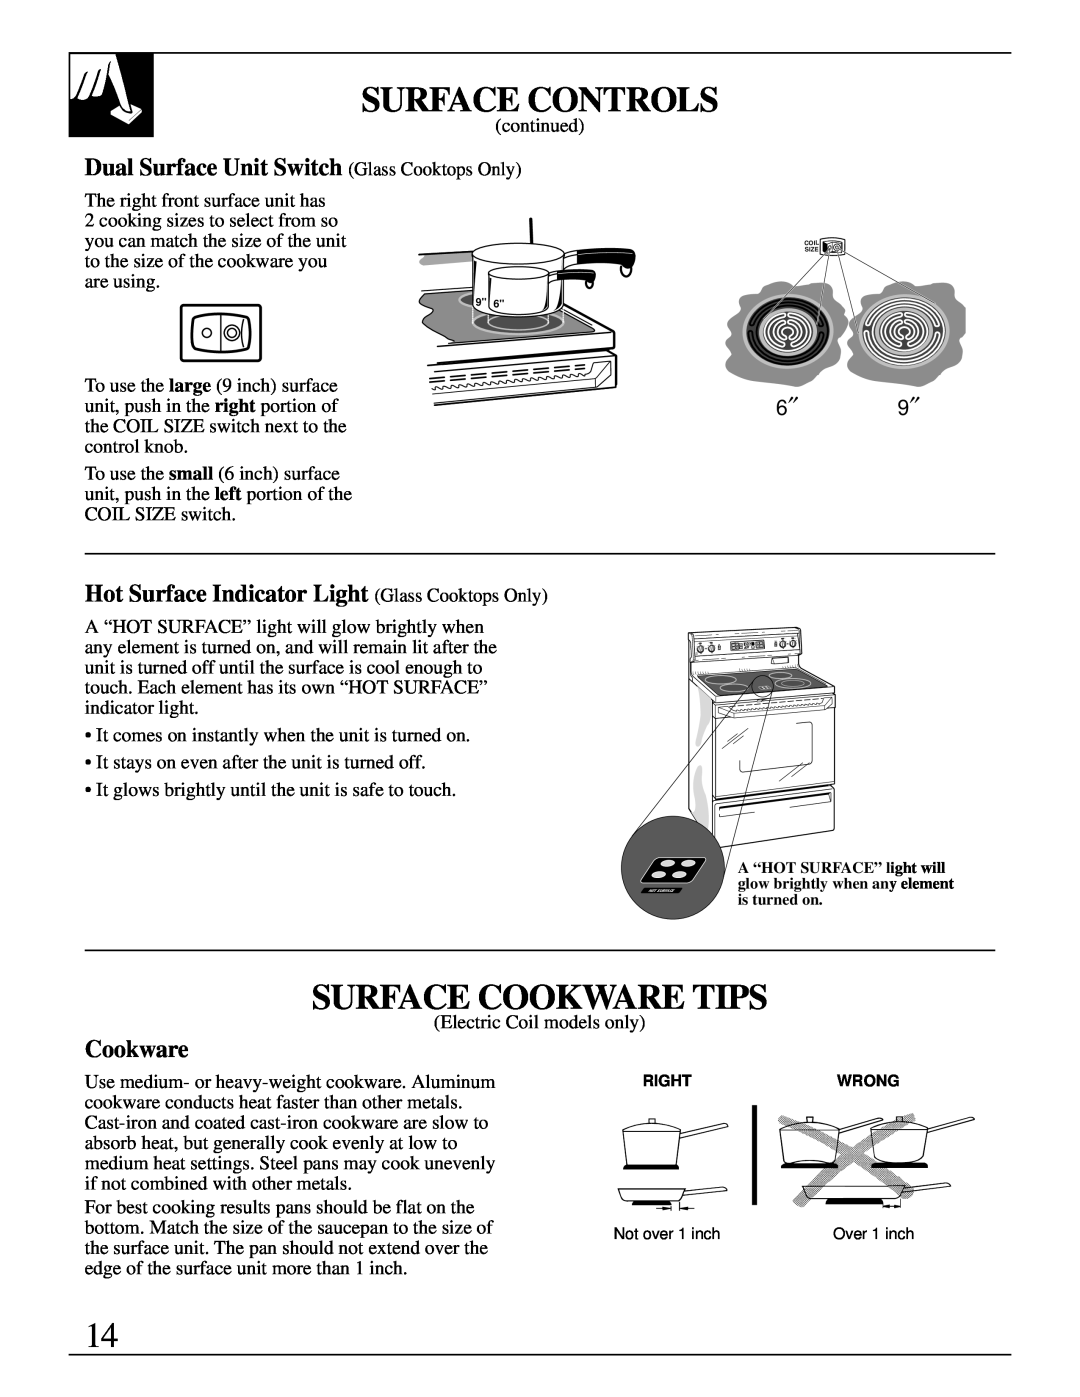 GE JBP95 warranty Surface Cookware Tips, Dual Surface Unit Switch Glass Cooktops Only, Surface Controls 